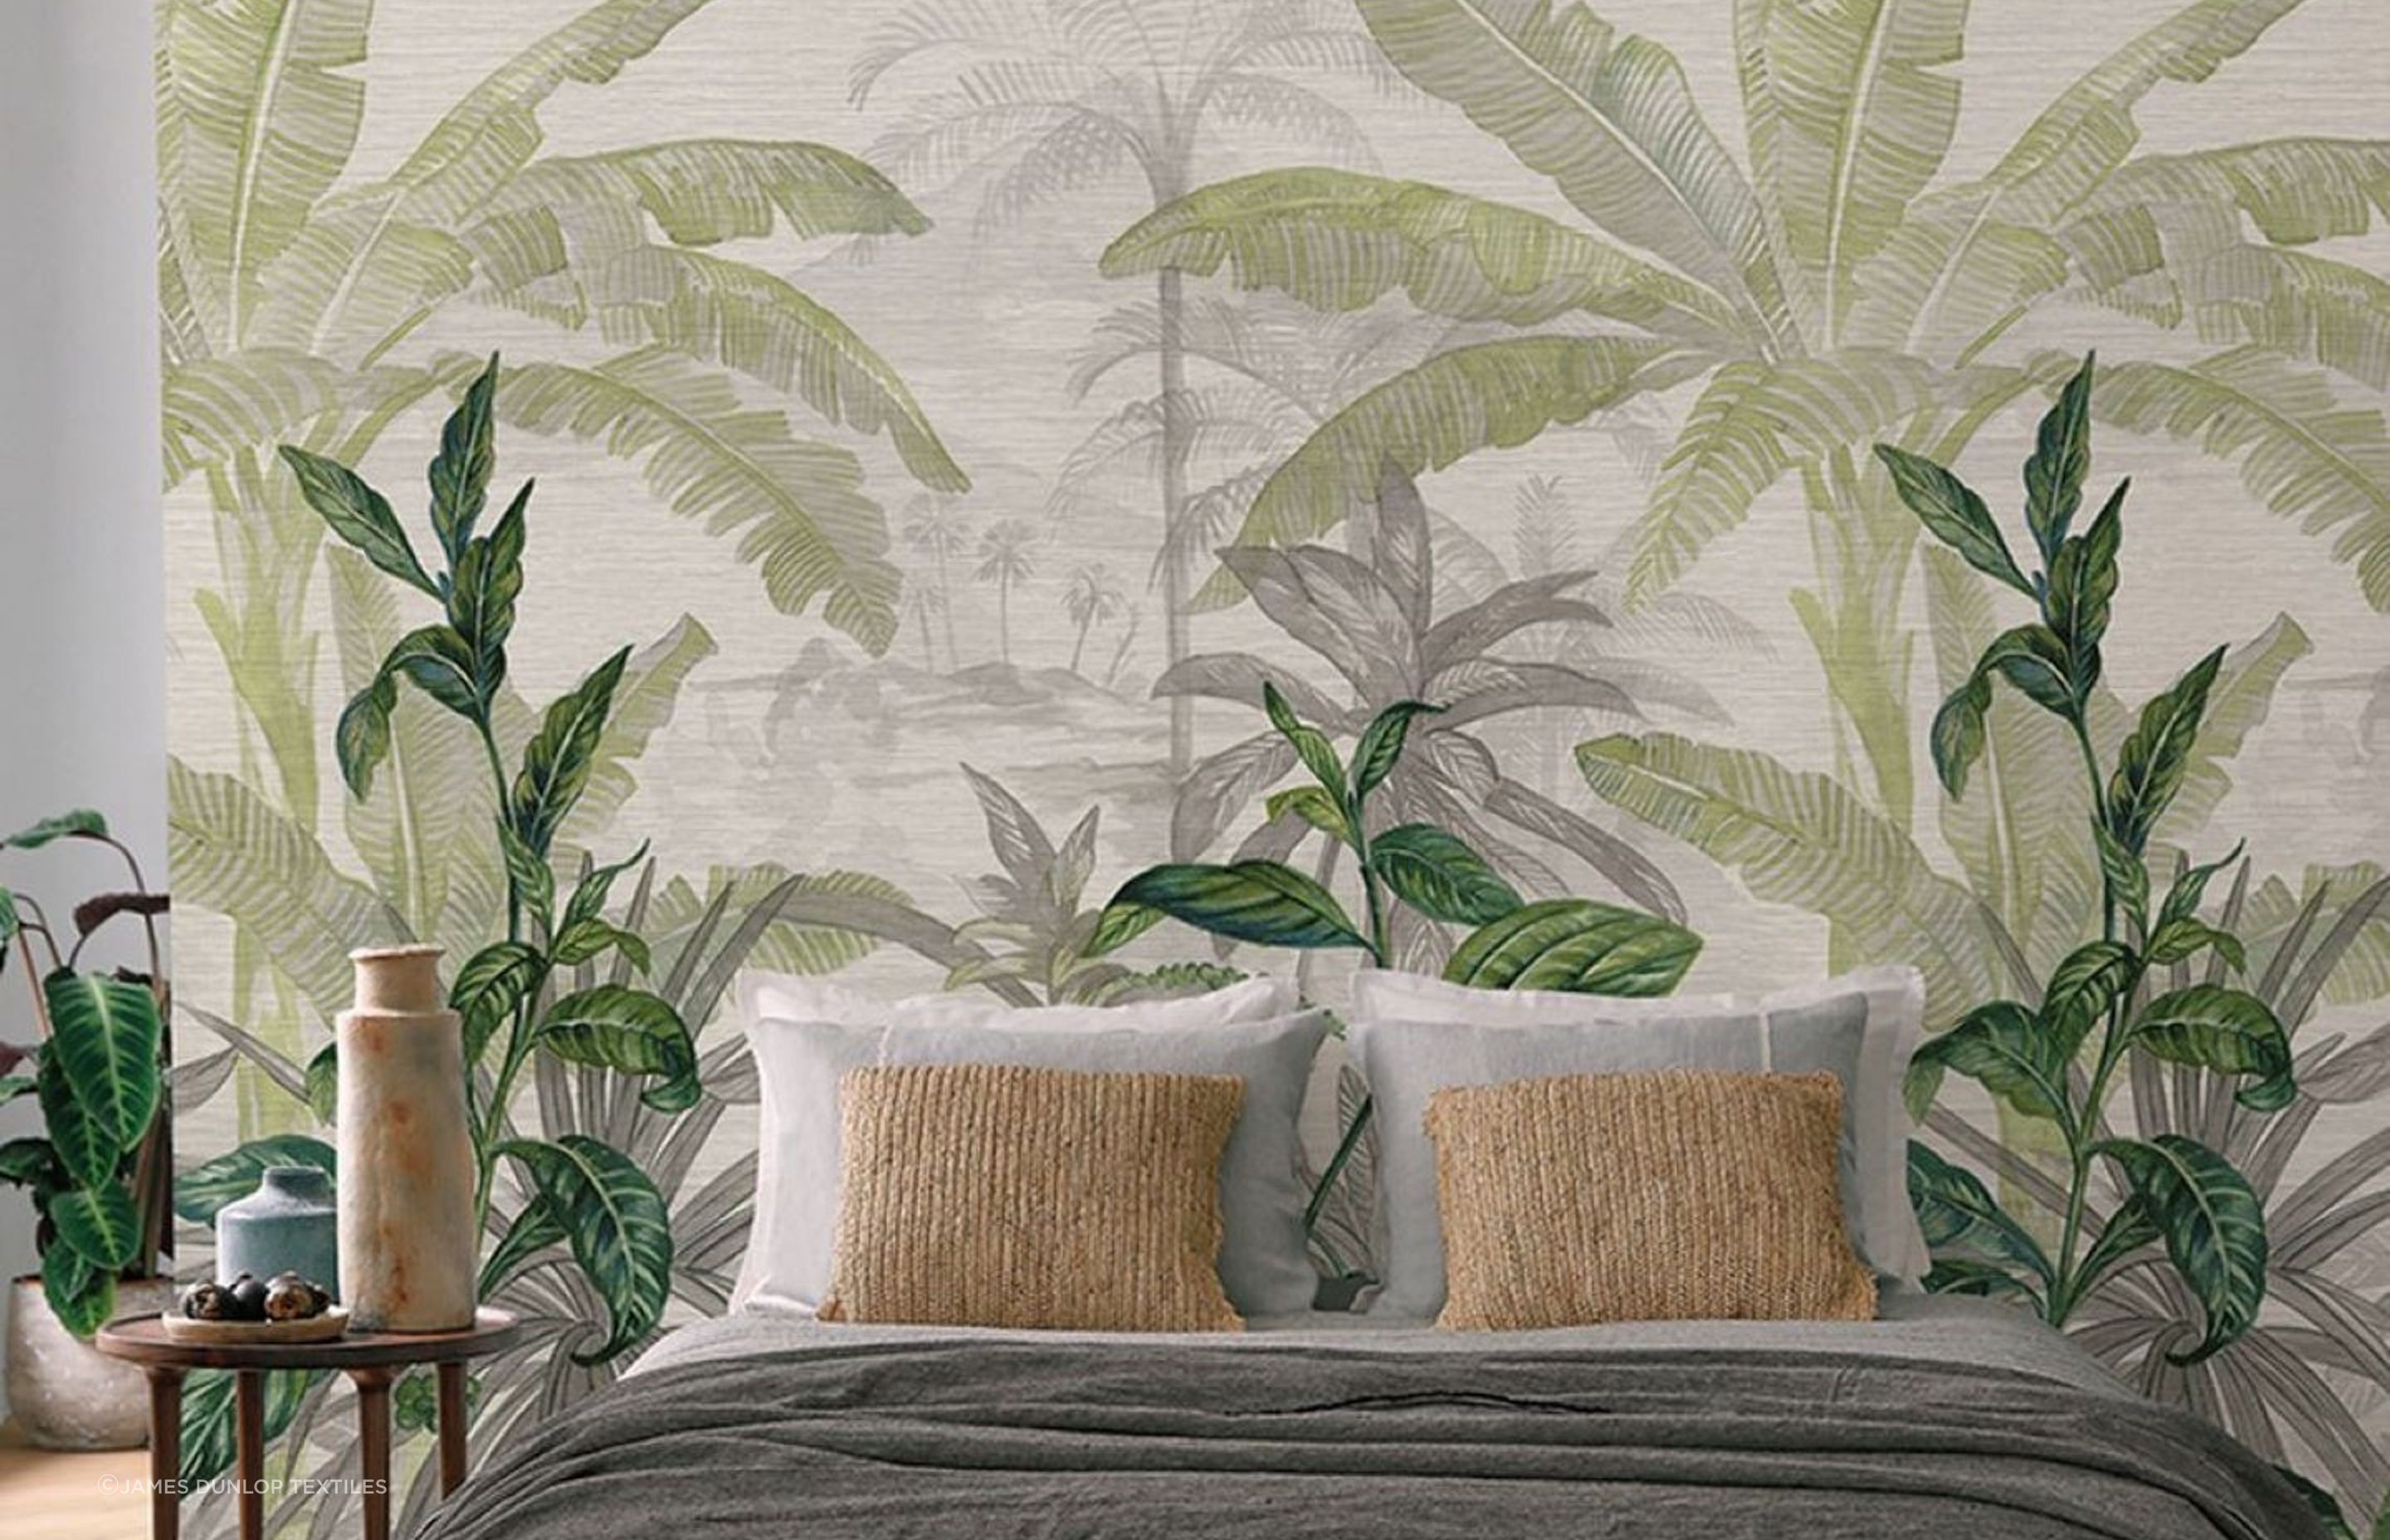 Options like the Olea w/panel 7484 Wallpaper by Casamance will immerse you completely into another place.